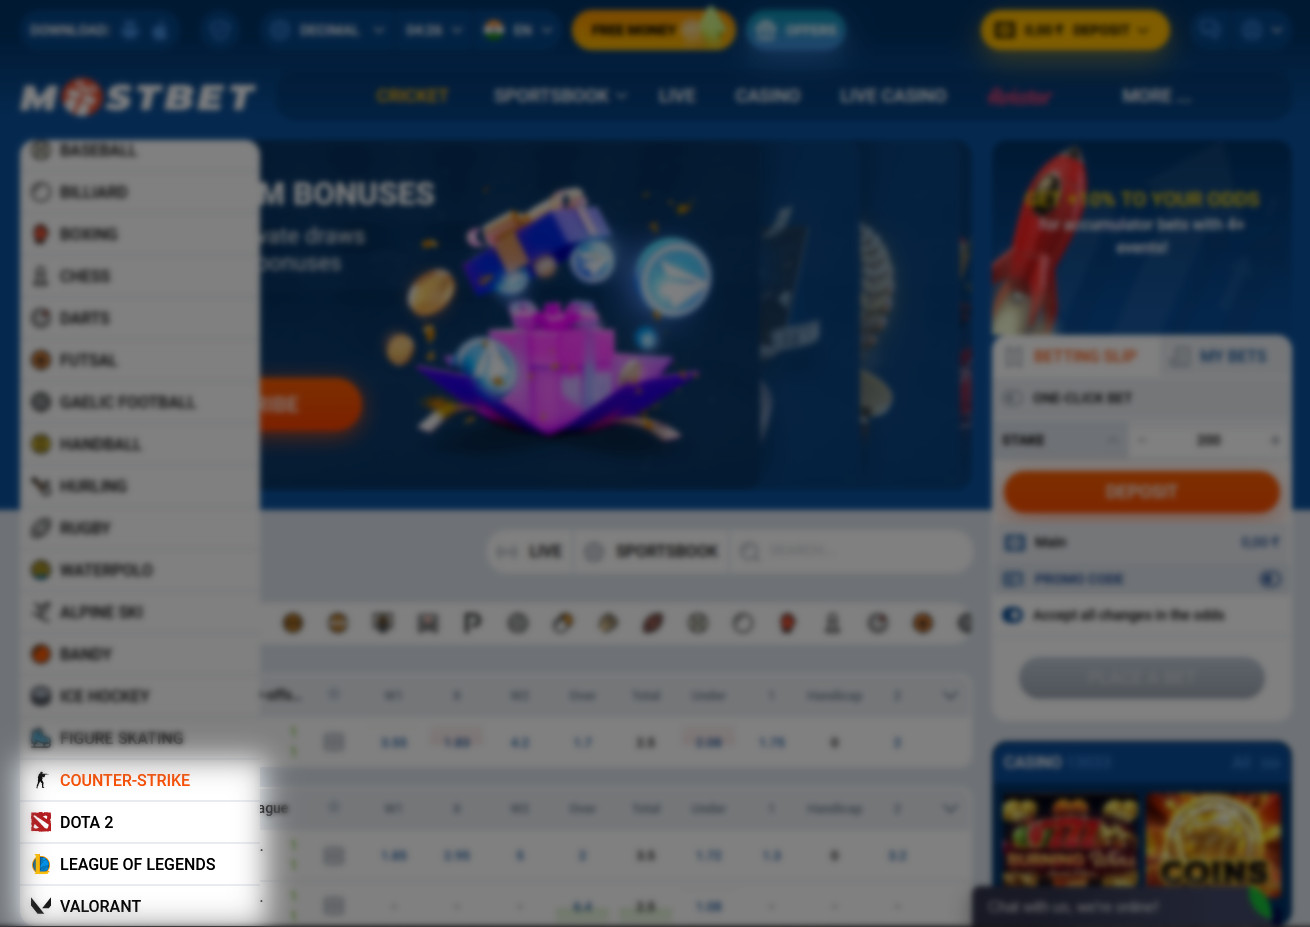 Section "Esports" on the website of the bookmaker Mostbet.